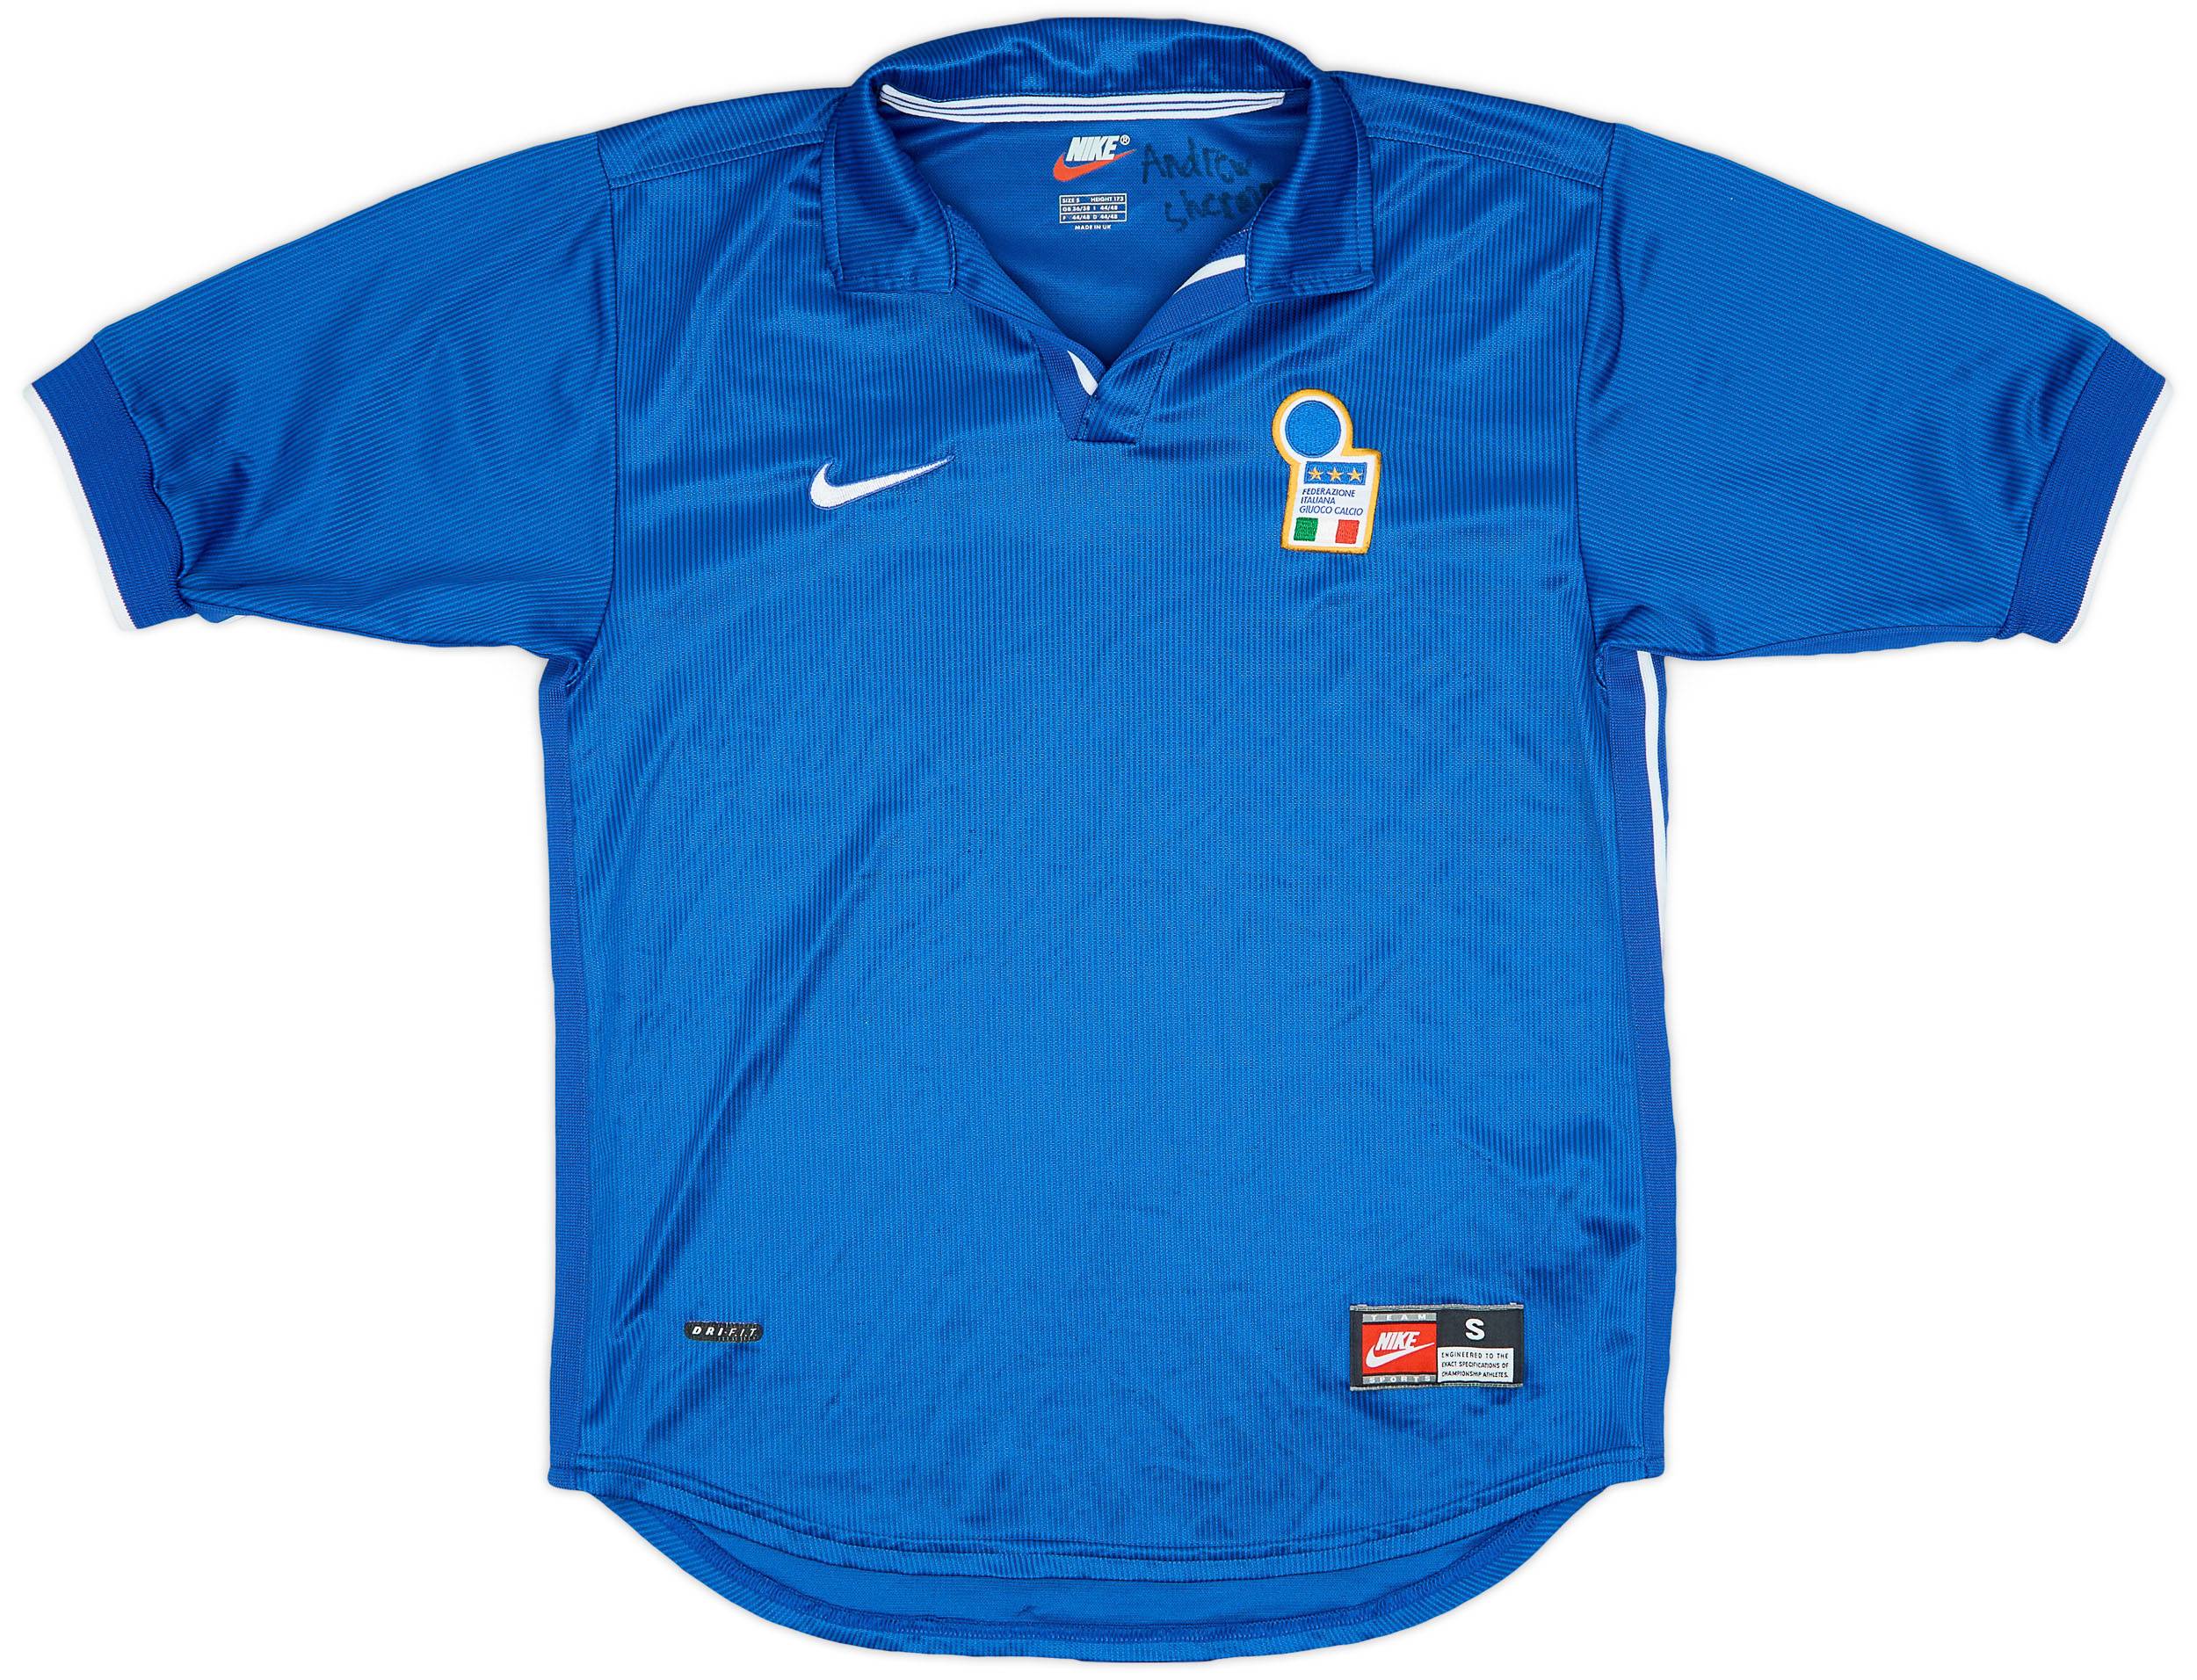 1997-98 Italy Home Shirt - 9/10 - (S)